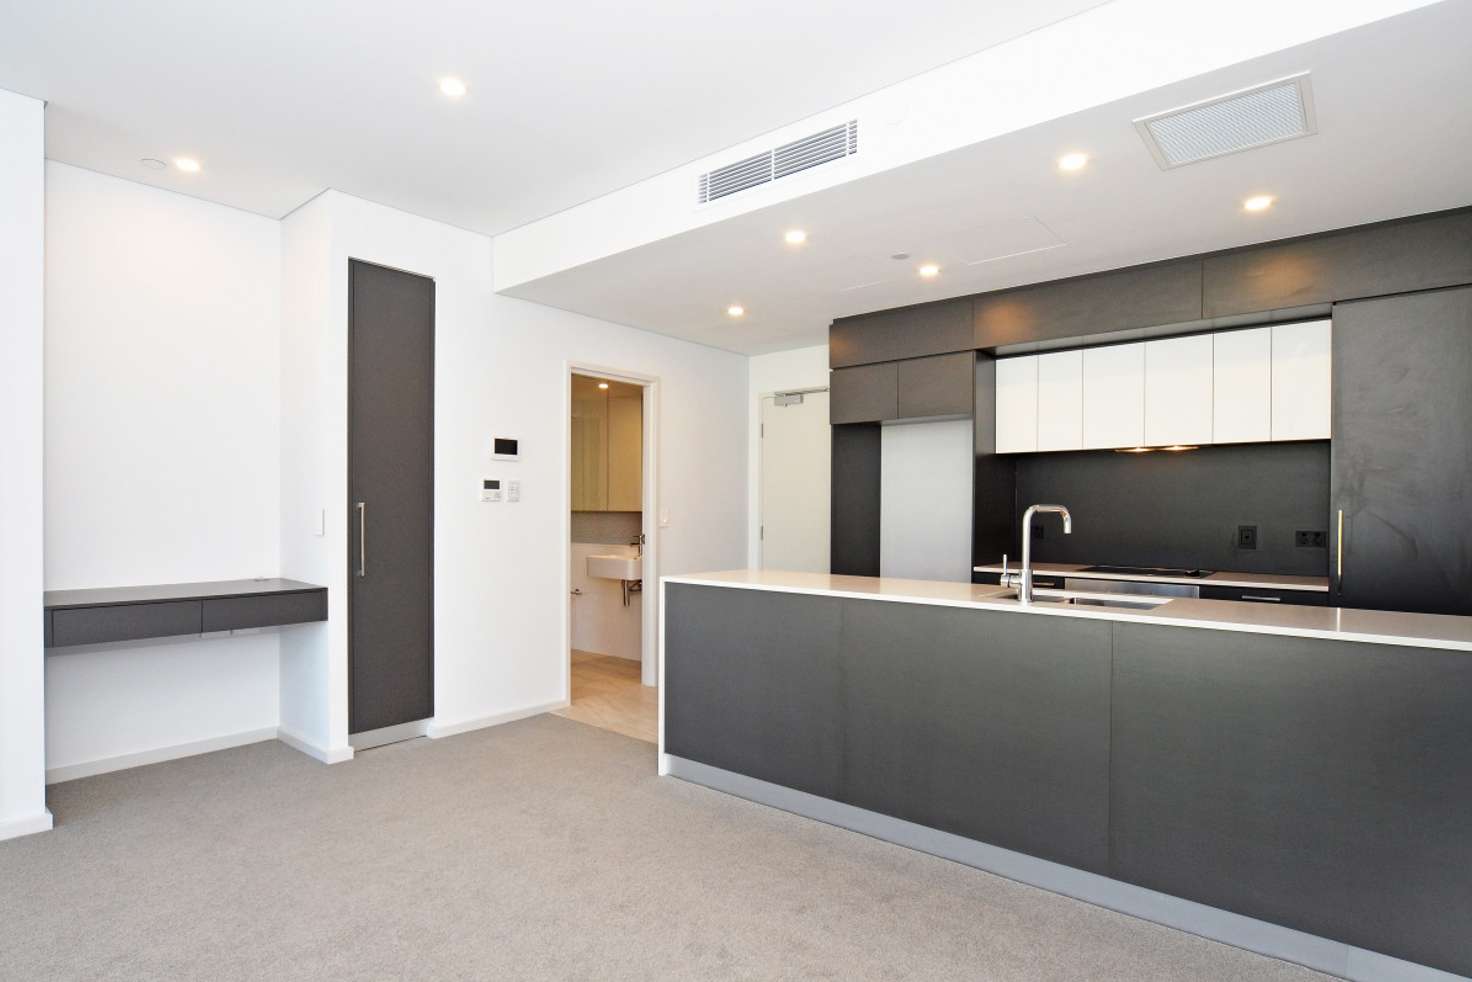 Main view of Homely apartment listing, 608/105 Stirling Street, Perth WA 6000